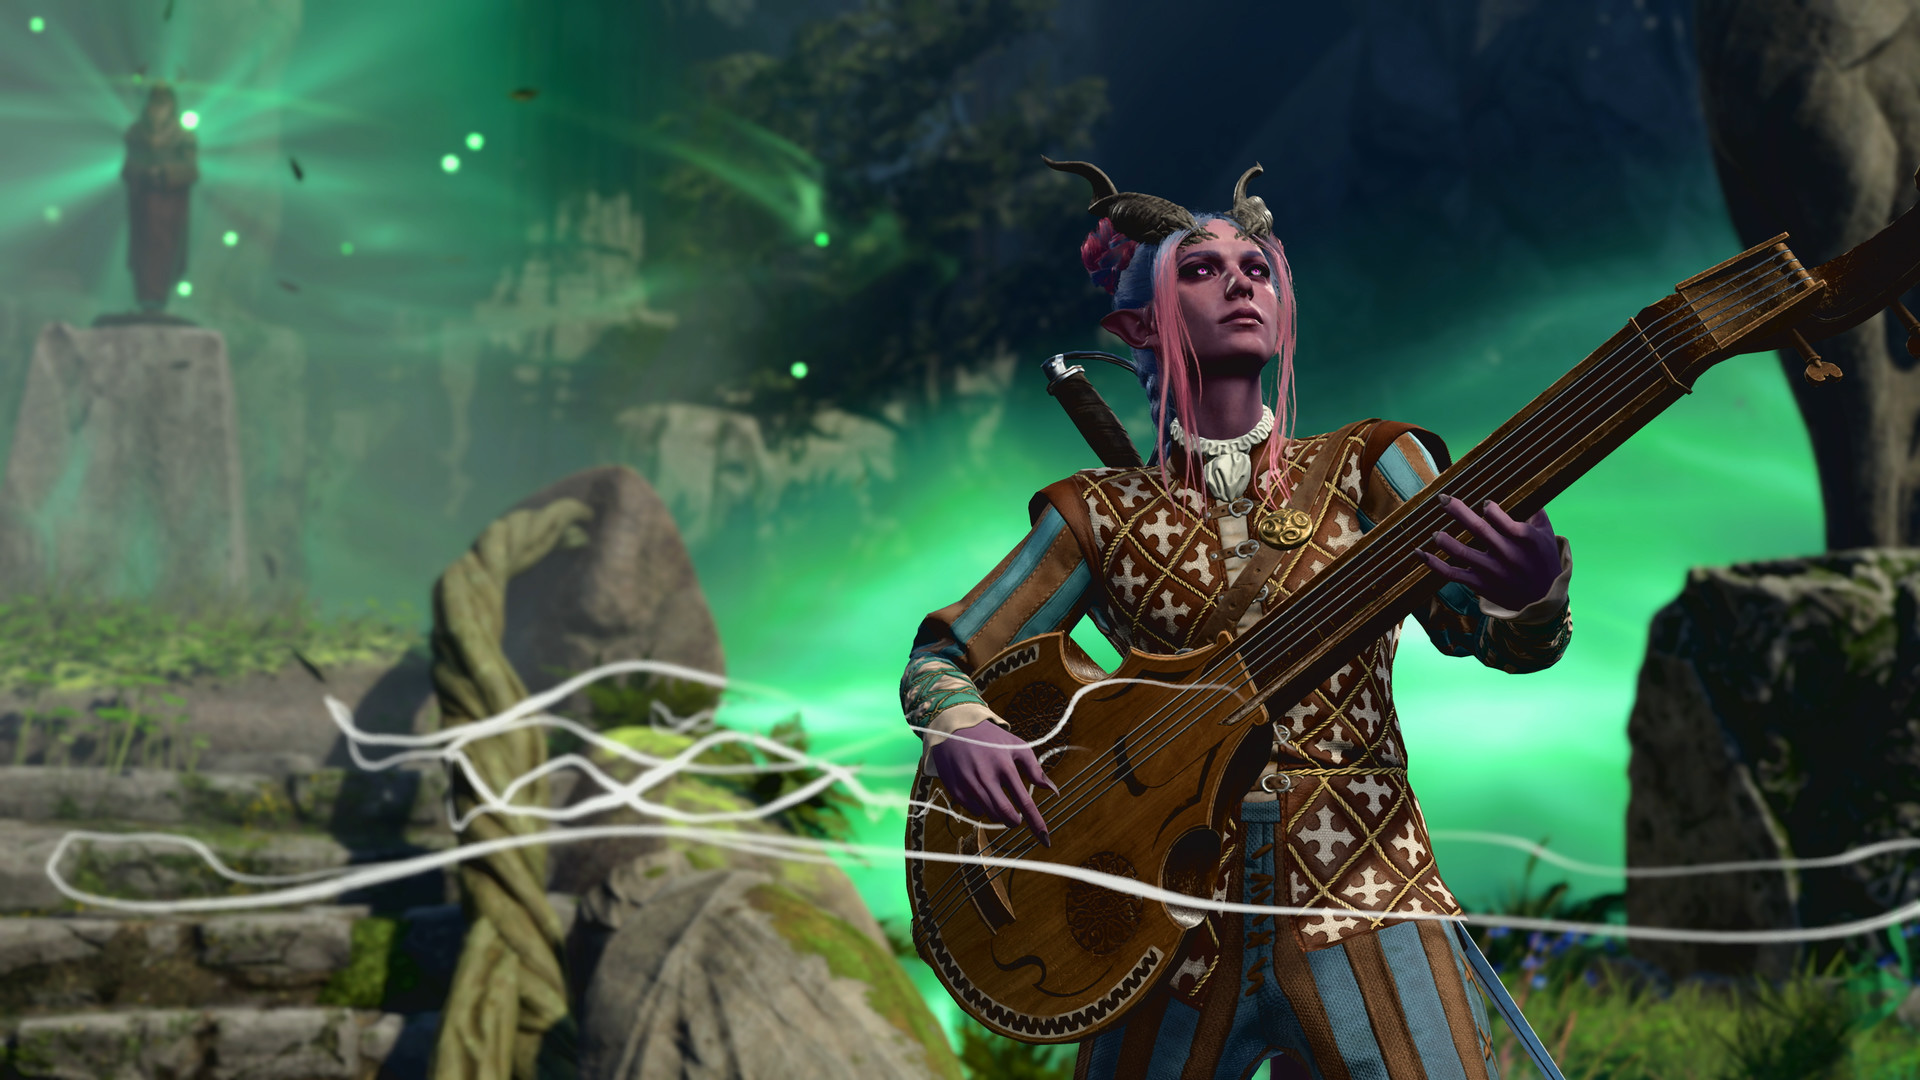 A bard weaves a spell